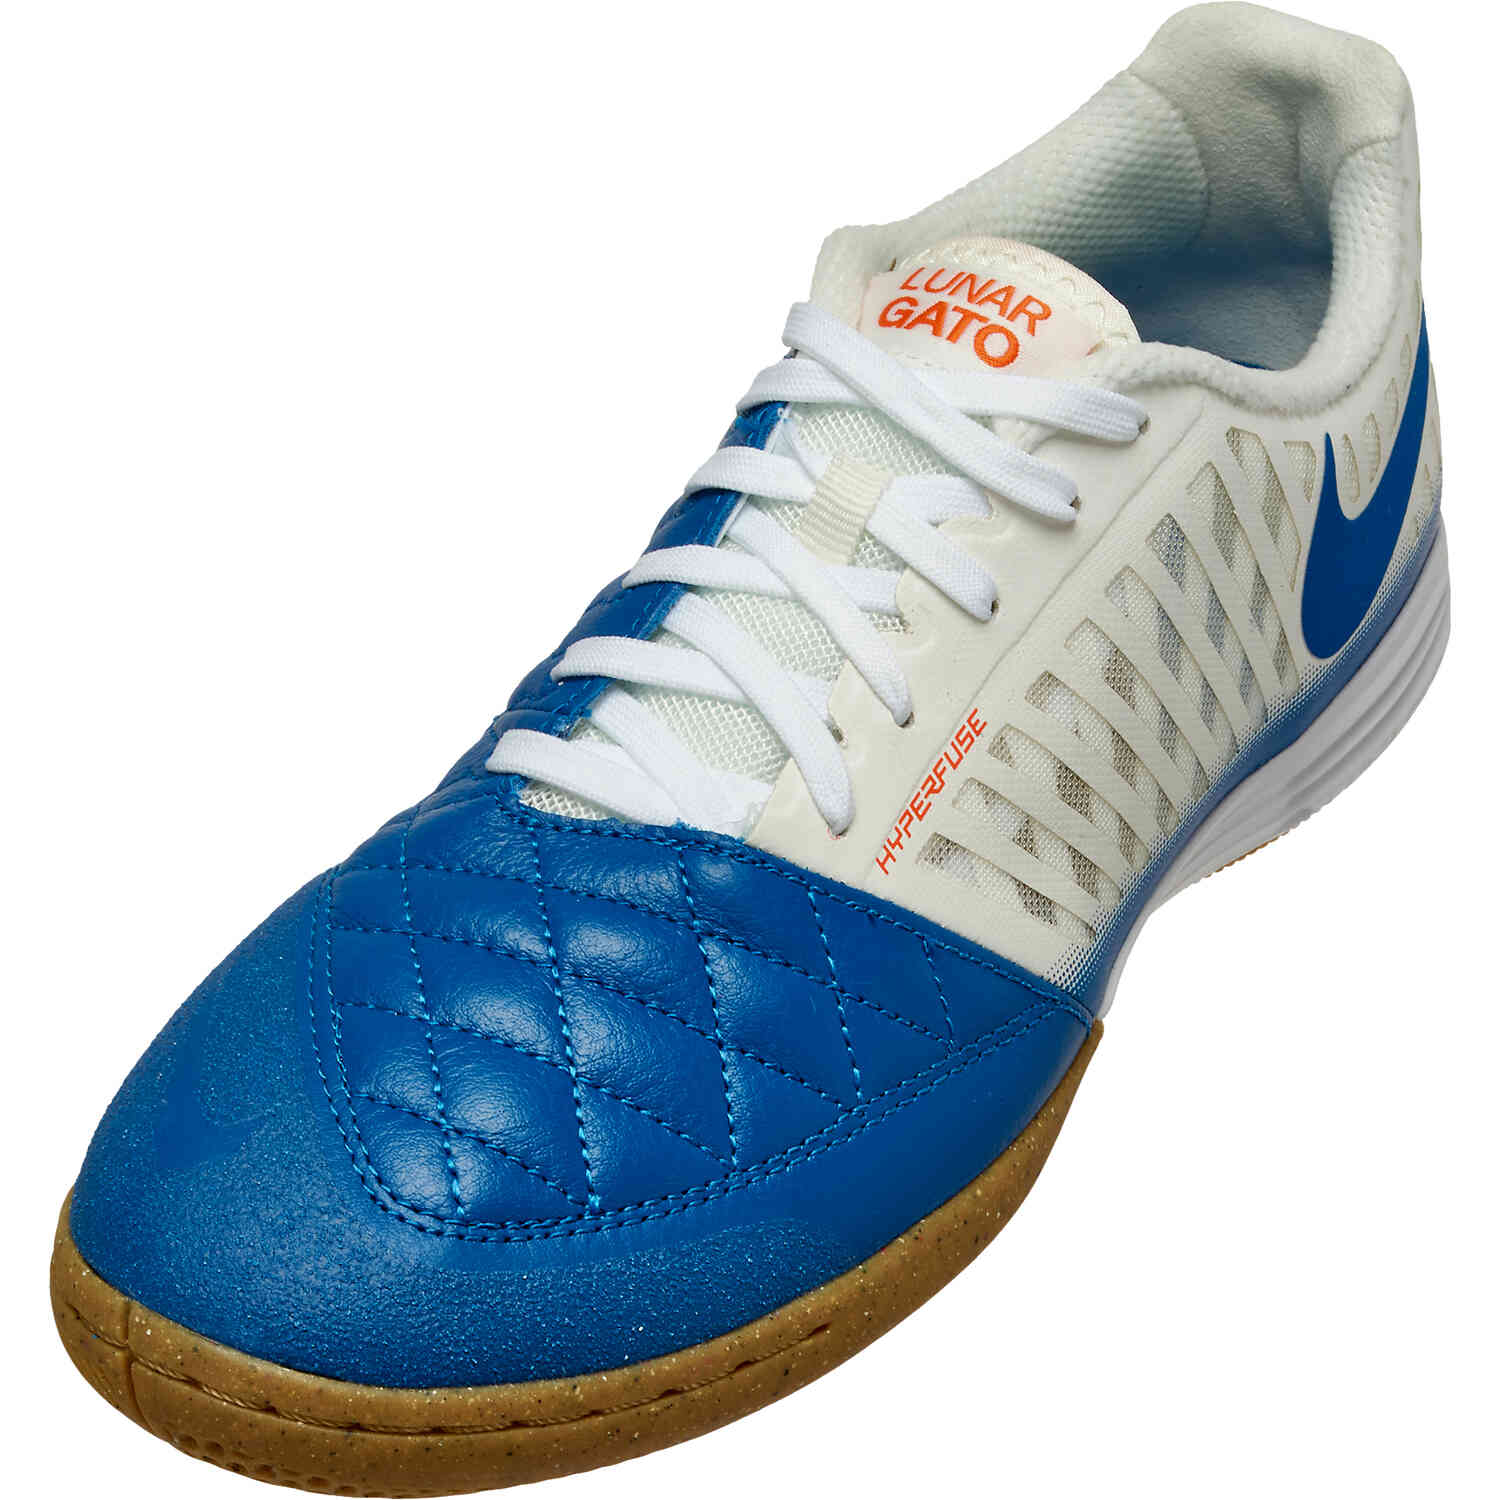 Nike Lunar Gato II IC Indoor Soccer Shoes - Sail/Blue Jay/White - Soccer  Master